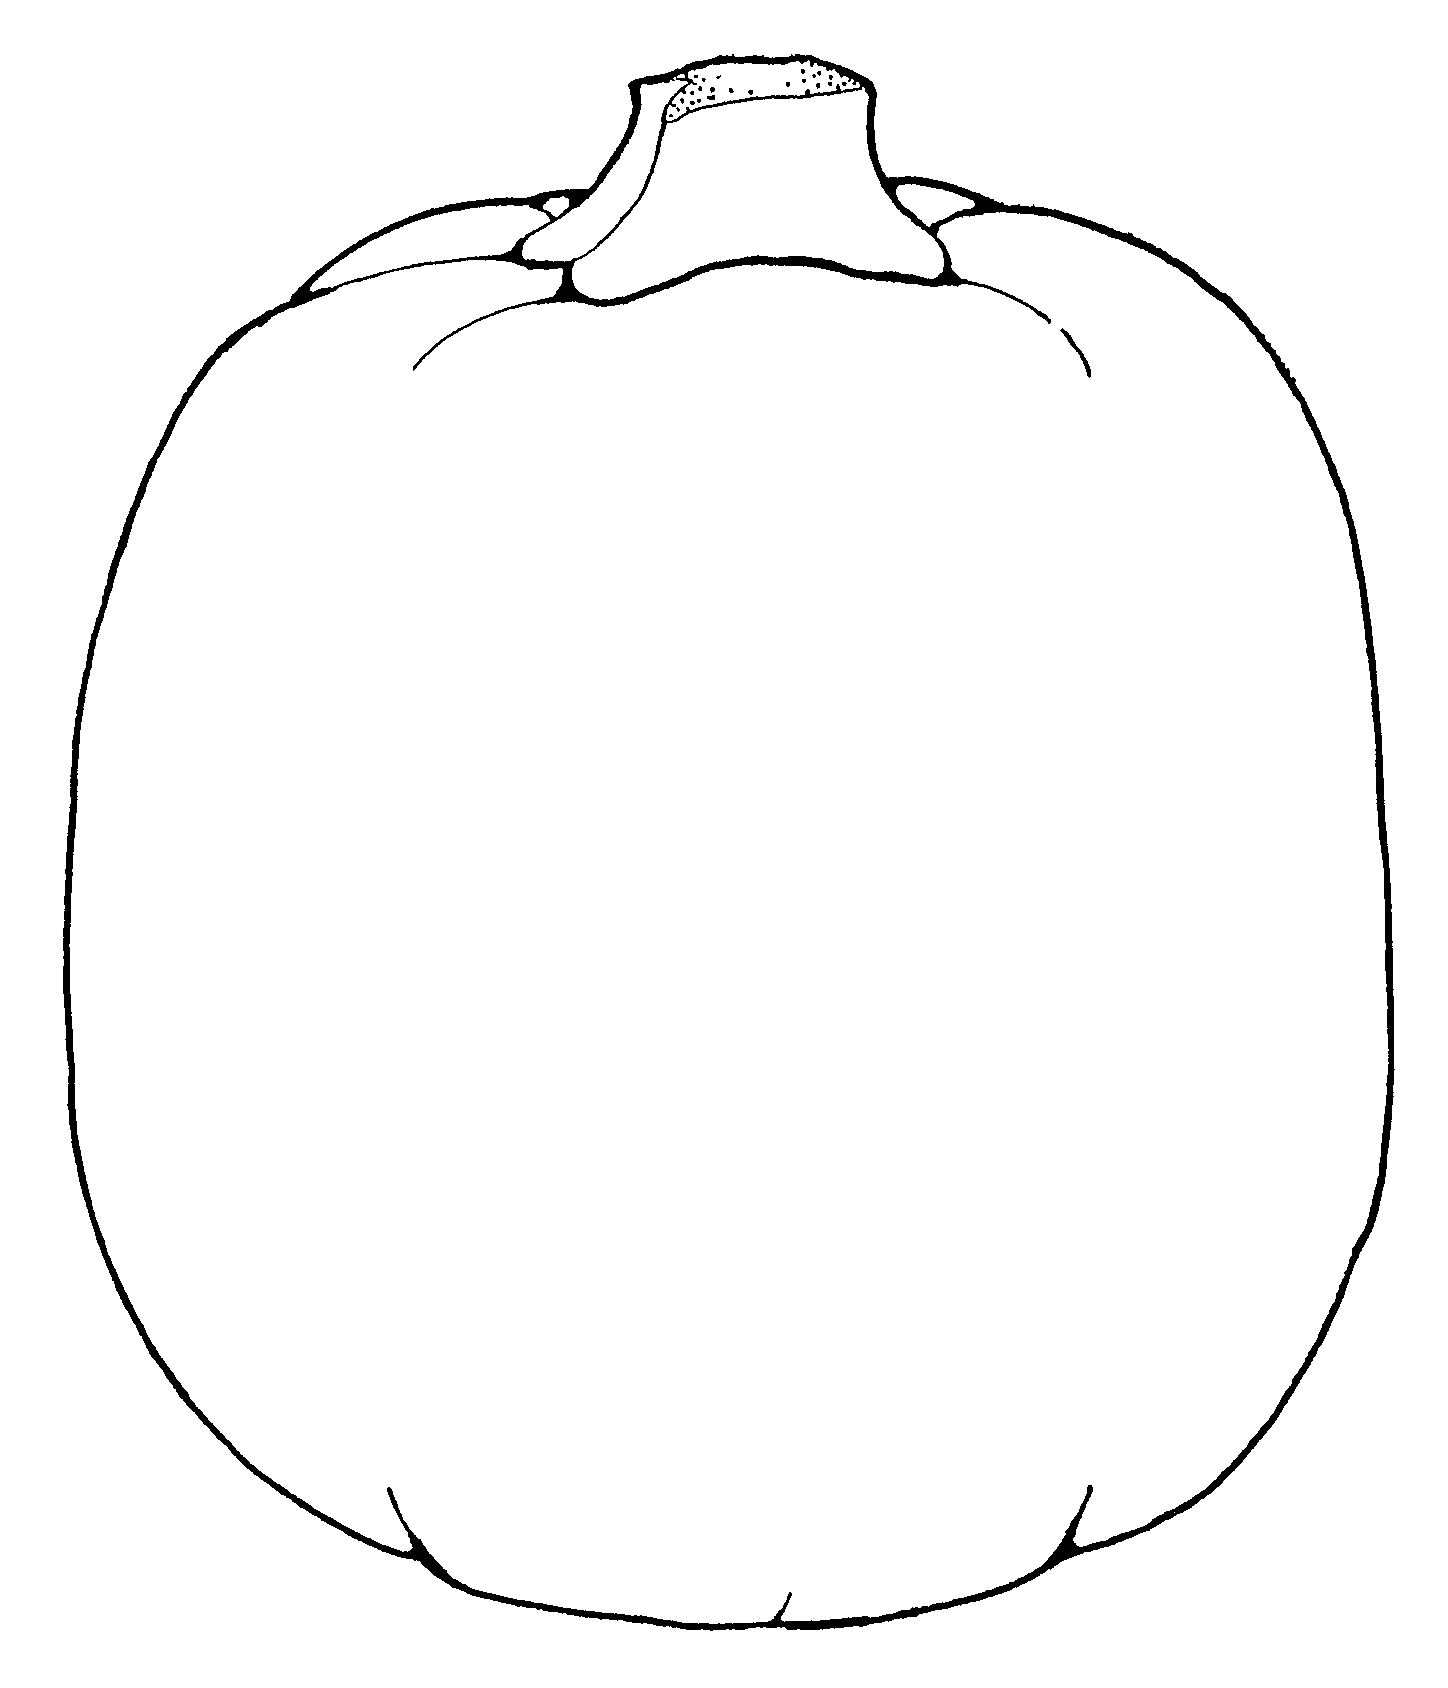 Free Black And White Pumpkin Clipart, Download Free Clip Art